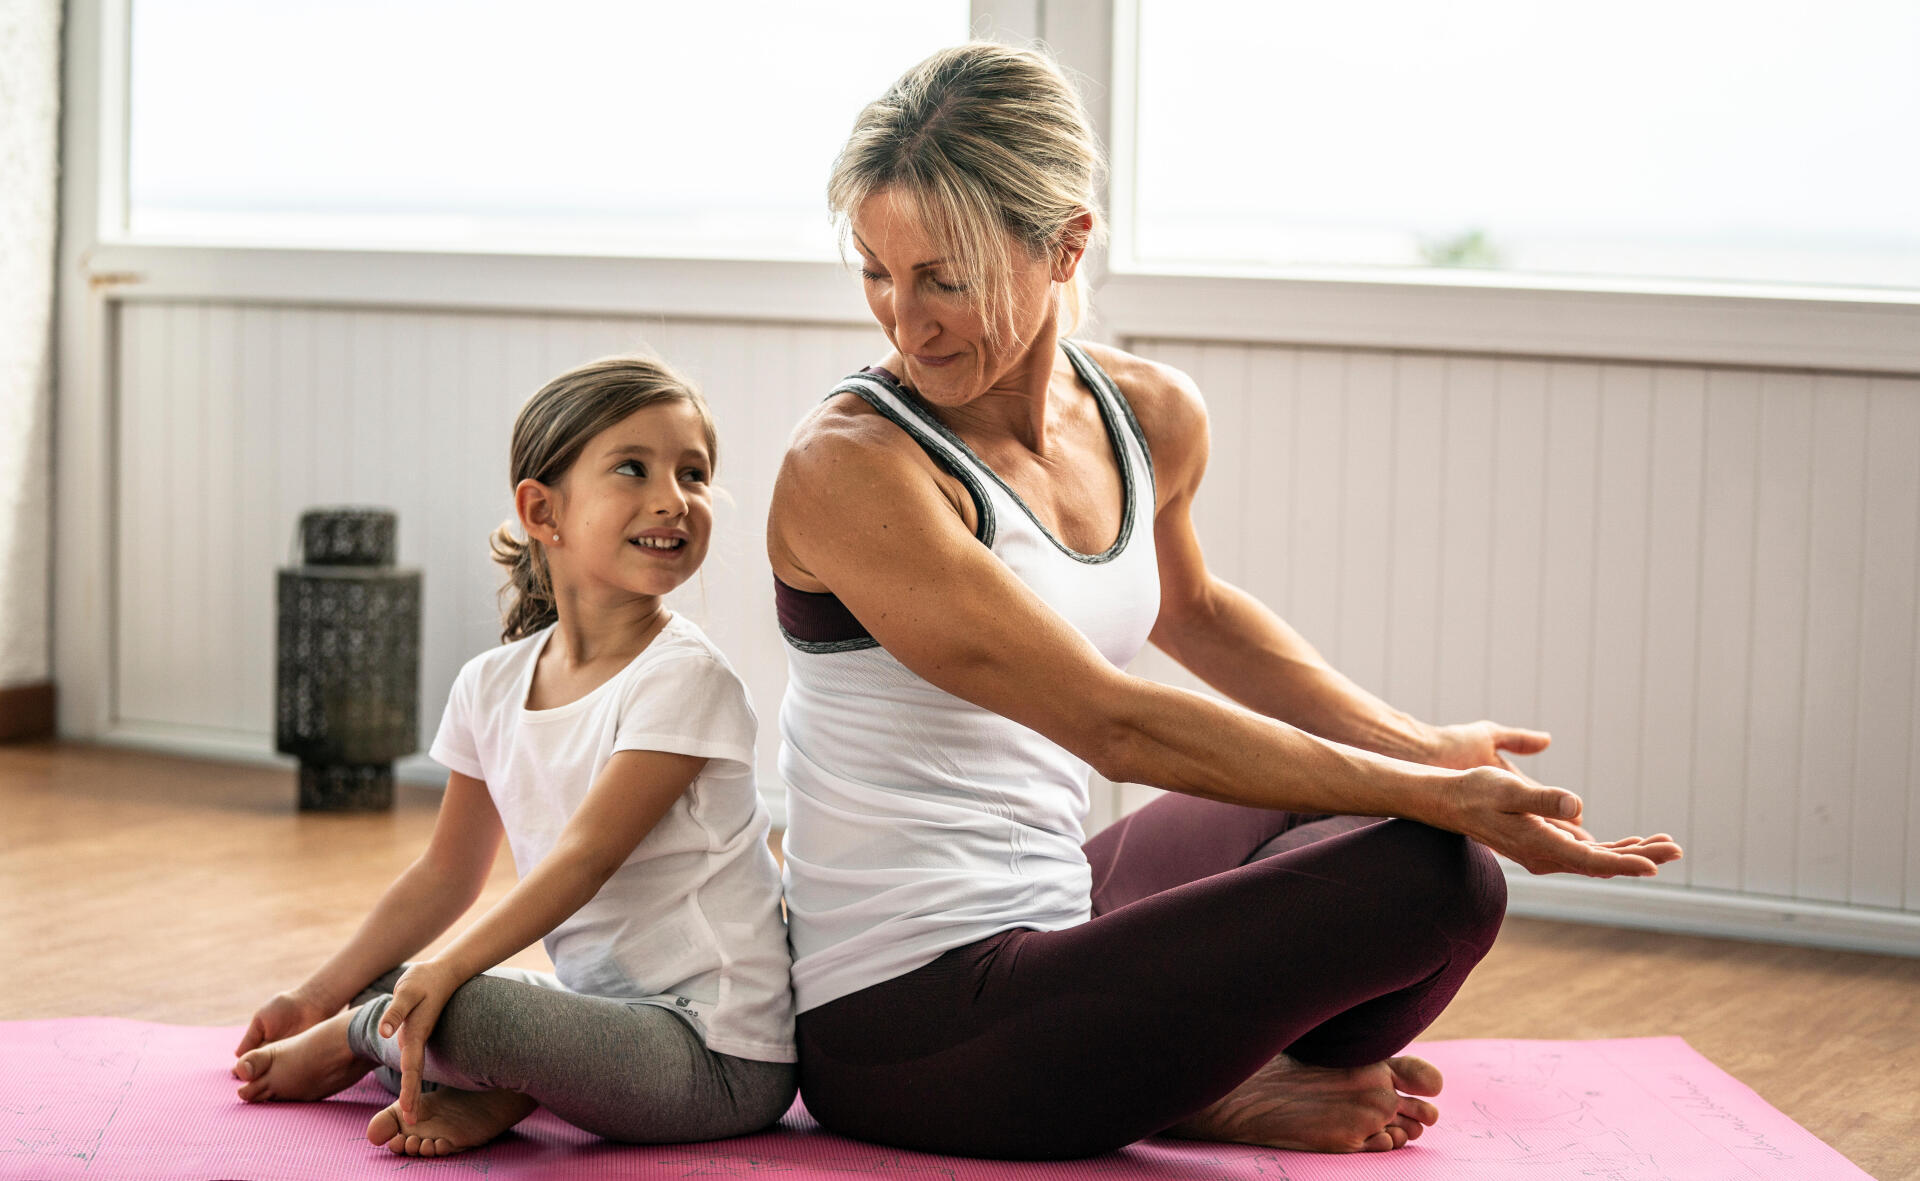 Yoga for kids: What are the benefits?